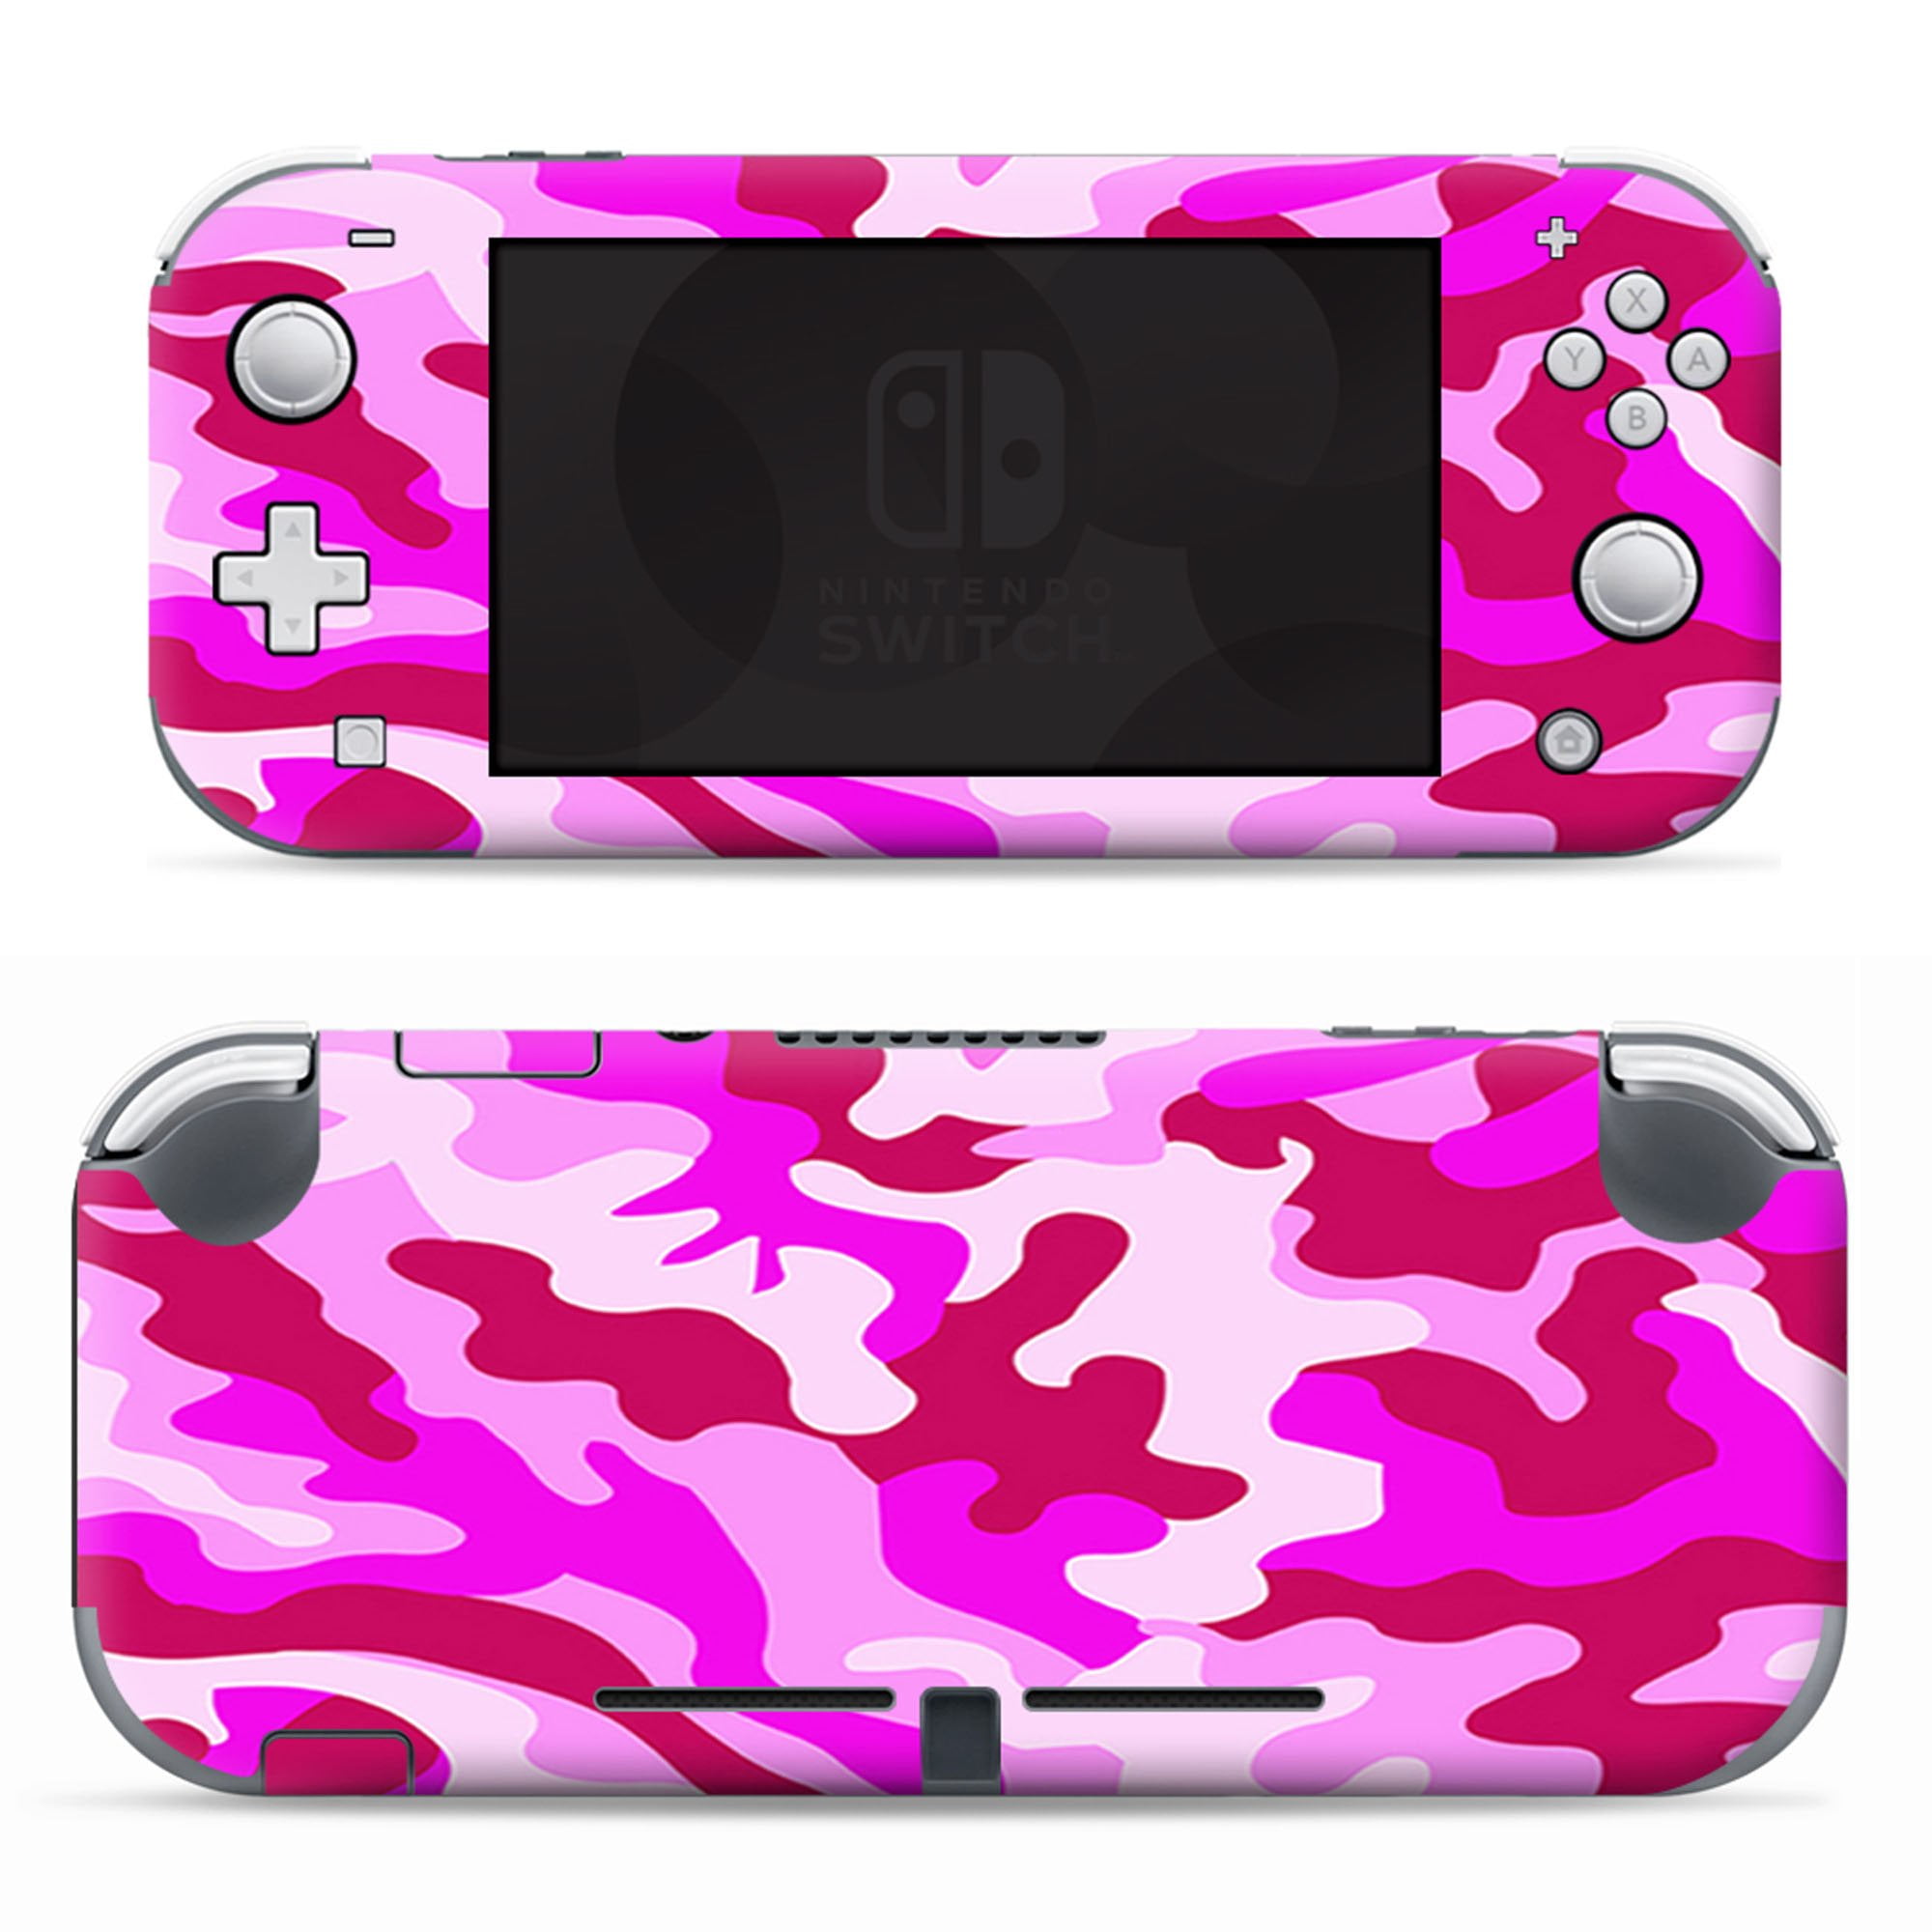 Nintendo Switch Lite Skins Decals Vinyl Wrap Decal Stickers Skins Cover Pink Camo Camouflage 